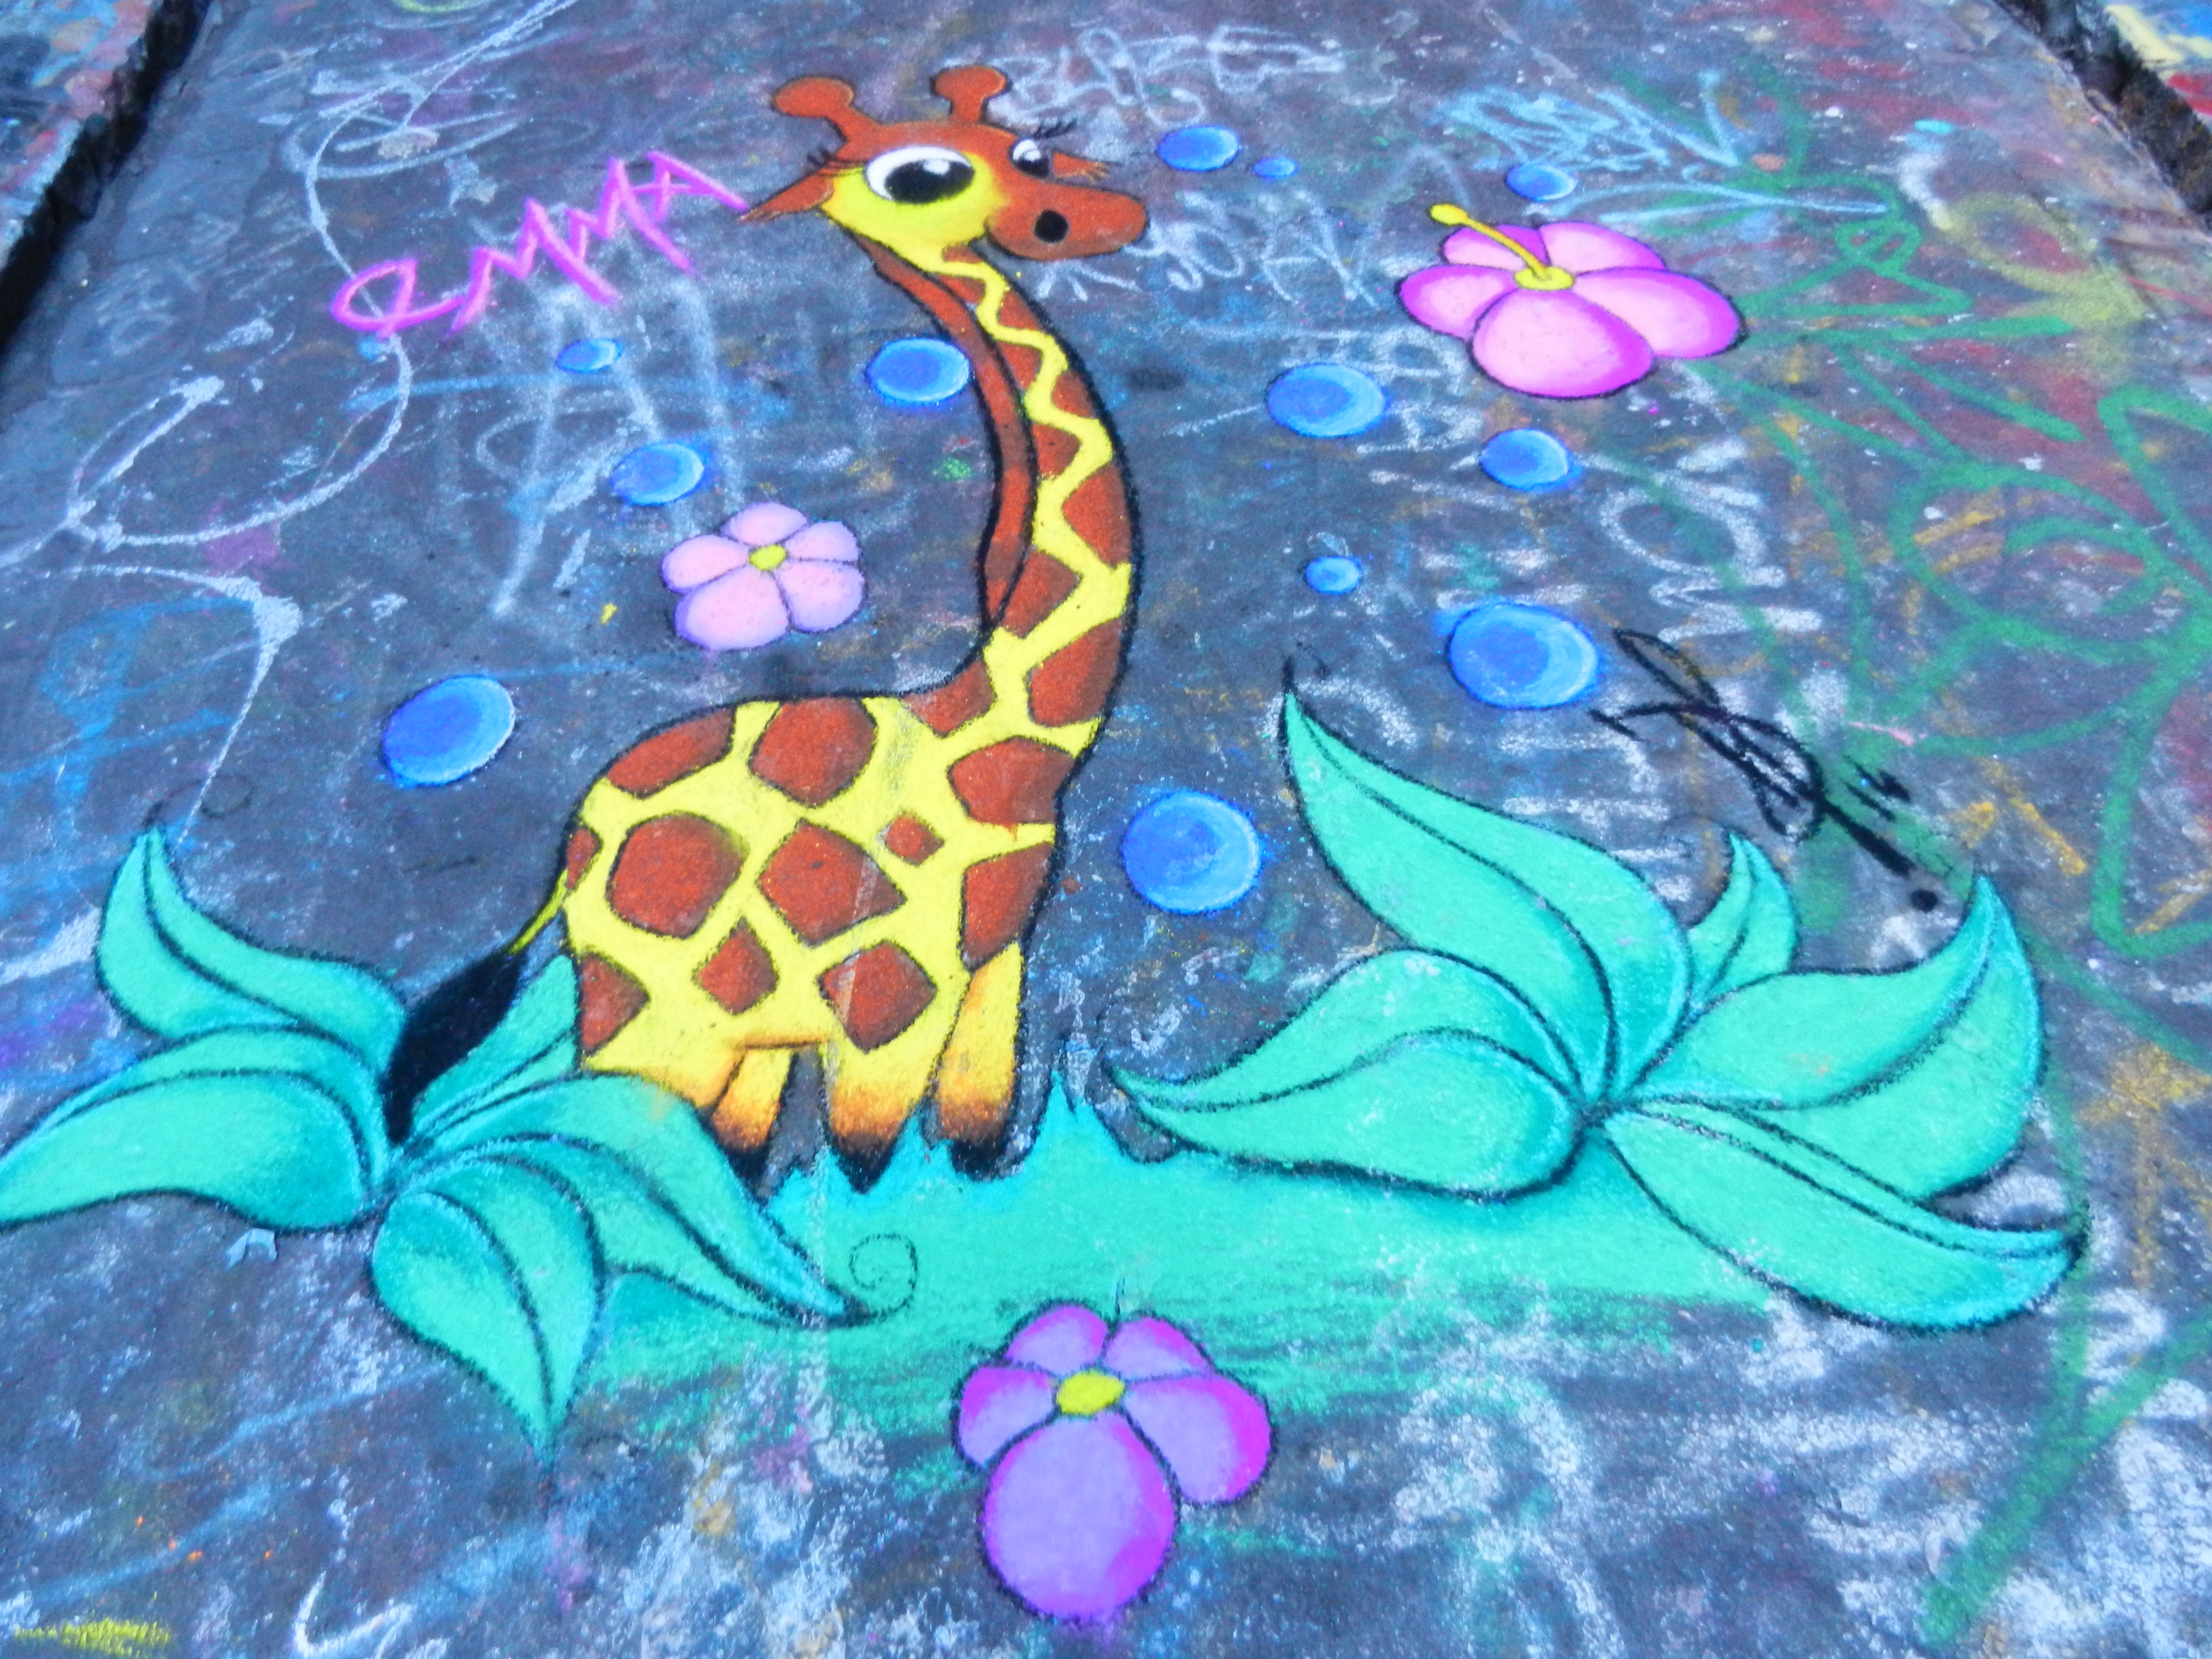 Brightly colored giraffe with flowers and greenery painted on a street.